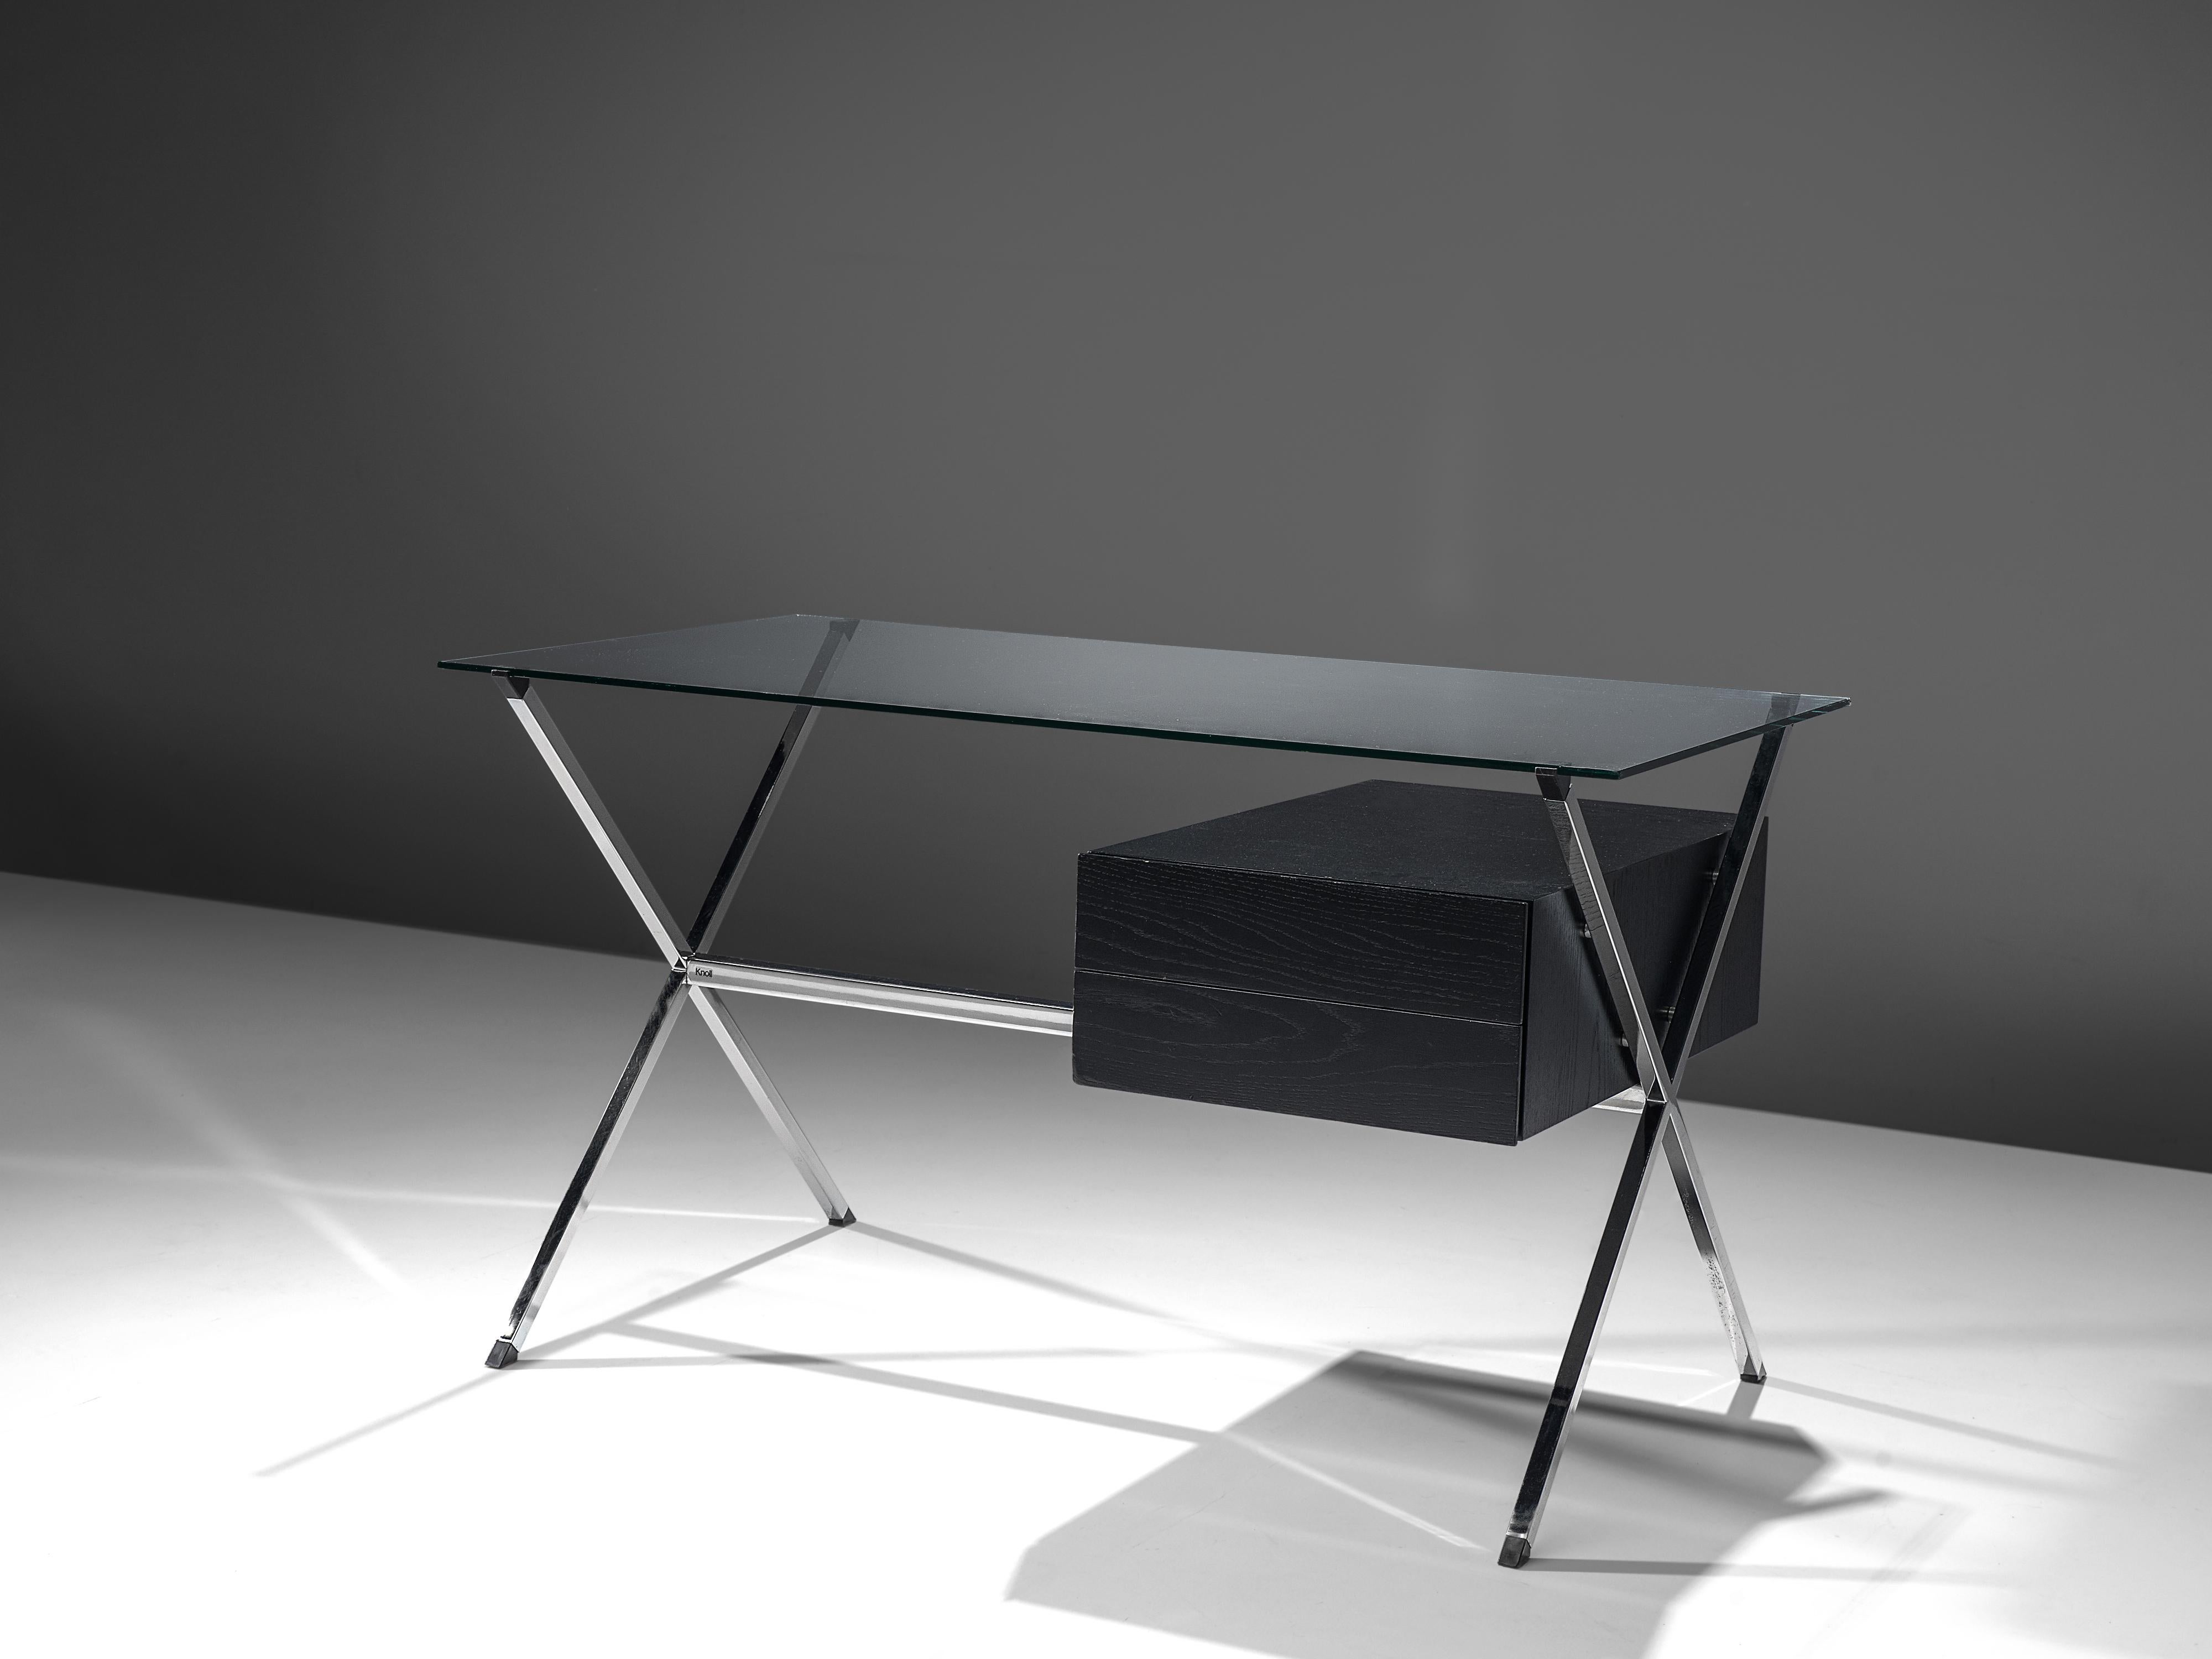 Franco Albini for Knoll, desk model '1928', glass, wood, chromed steel, Italy, design 1949

Franco Albini’s '1928' desk combines glass, steel and wood which results in a minimalistic balance. The desk features Albini’s design philosophy and